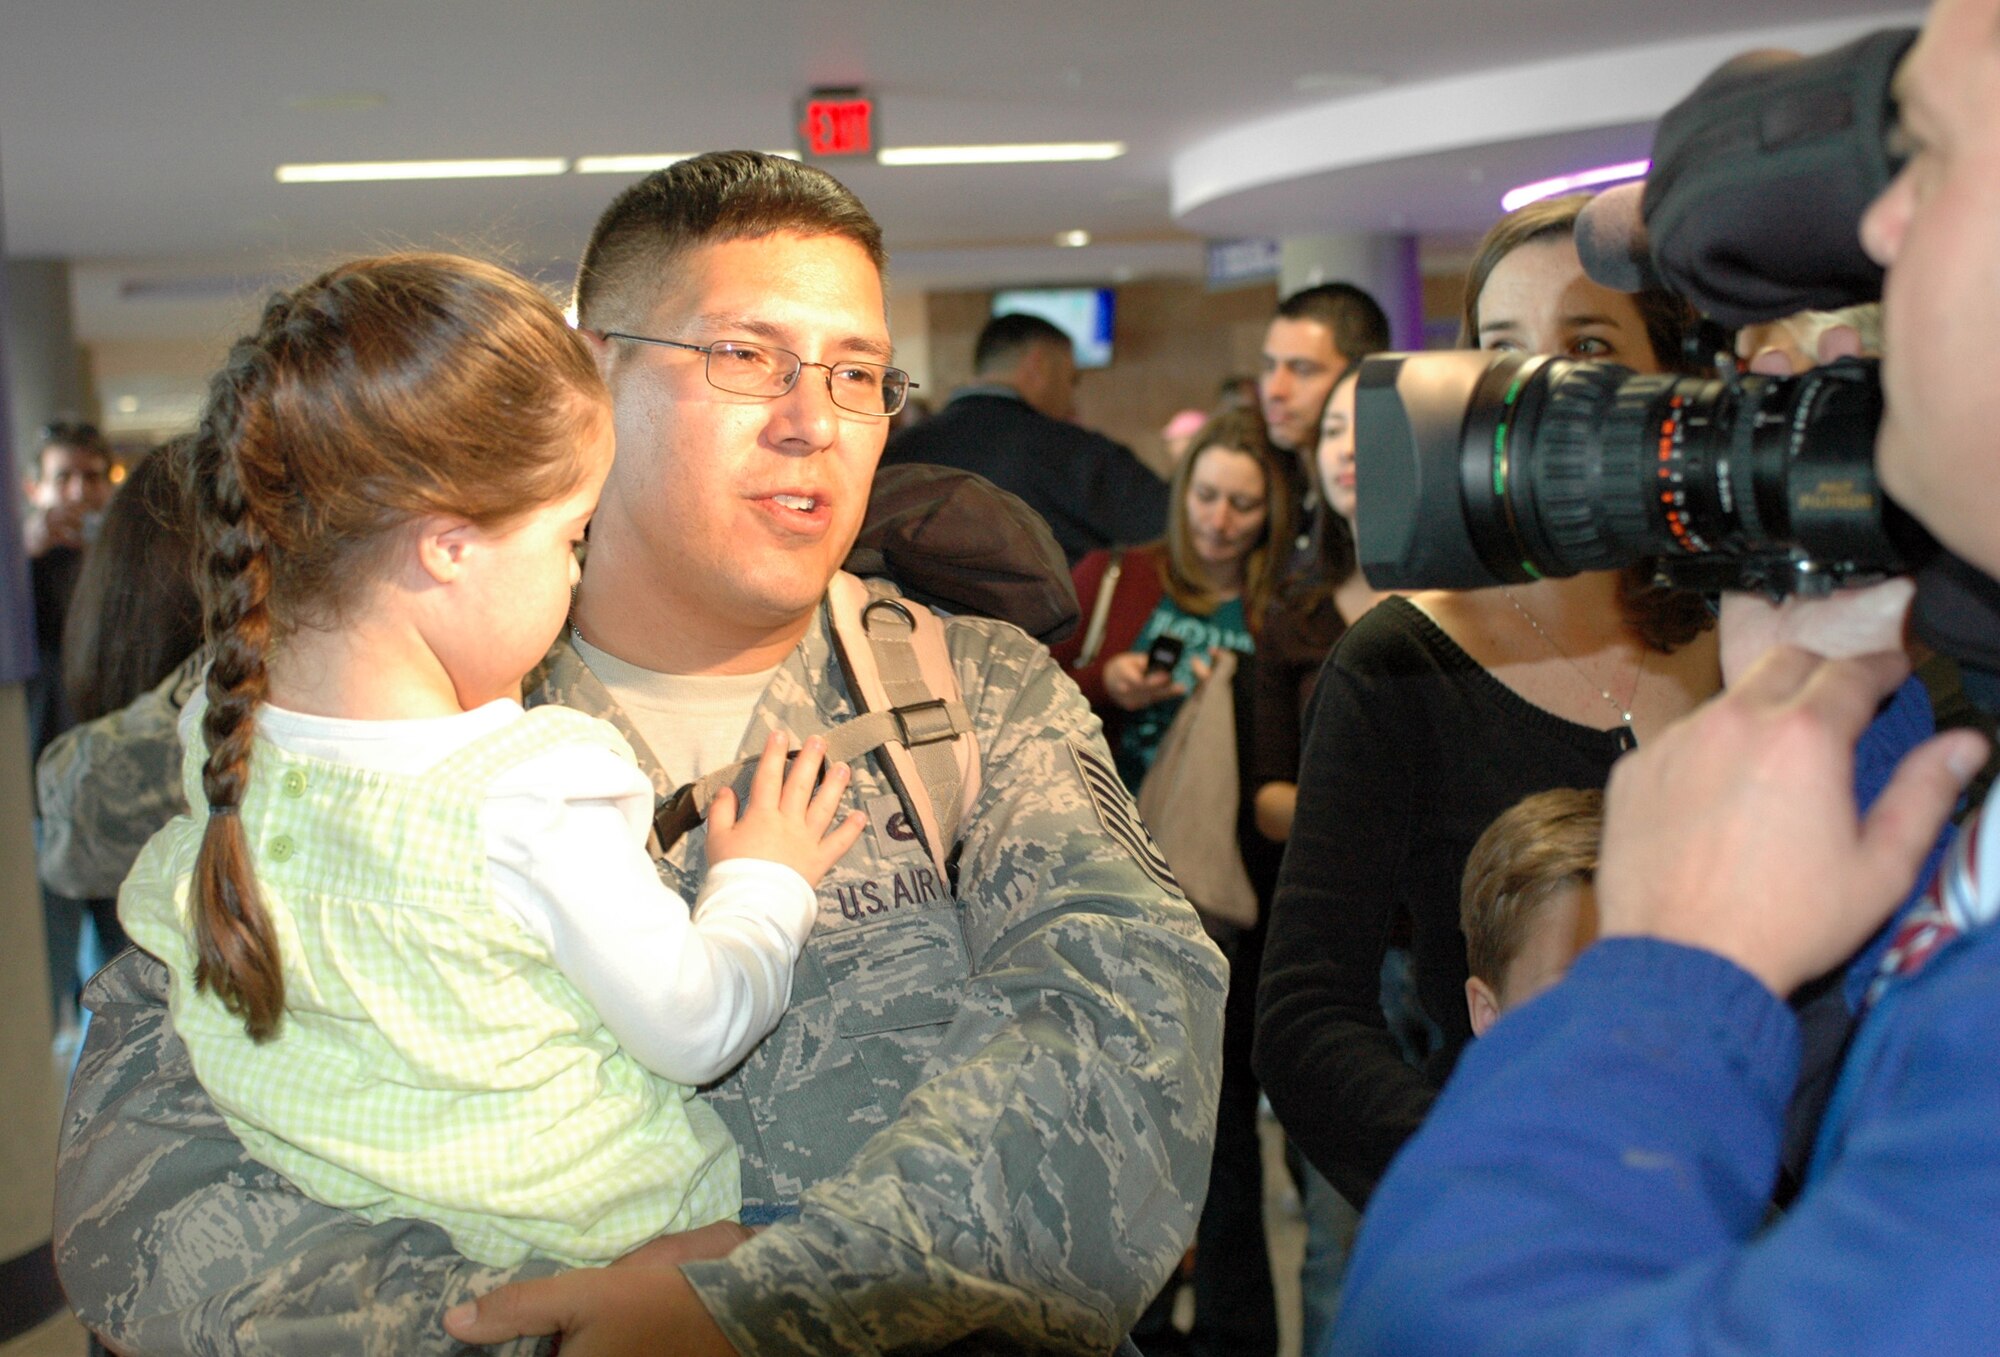 Tech. Sgt. John Sandoval interviews with KVOA Channel 4's Tyler Wing about his deployment for the evening news. Family and friends crowded the baggage claim area at Tucson International Airport to welcome home 28 aircraft maintainers and pilots Jan. 24. The Guardsmen volunteered for tours ranging from 8 months to 30 days in duration. (Air National Guard photo by Capt. Gabe Johnson)